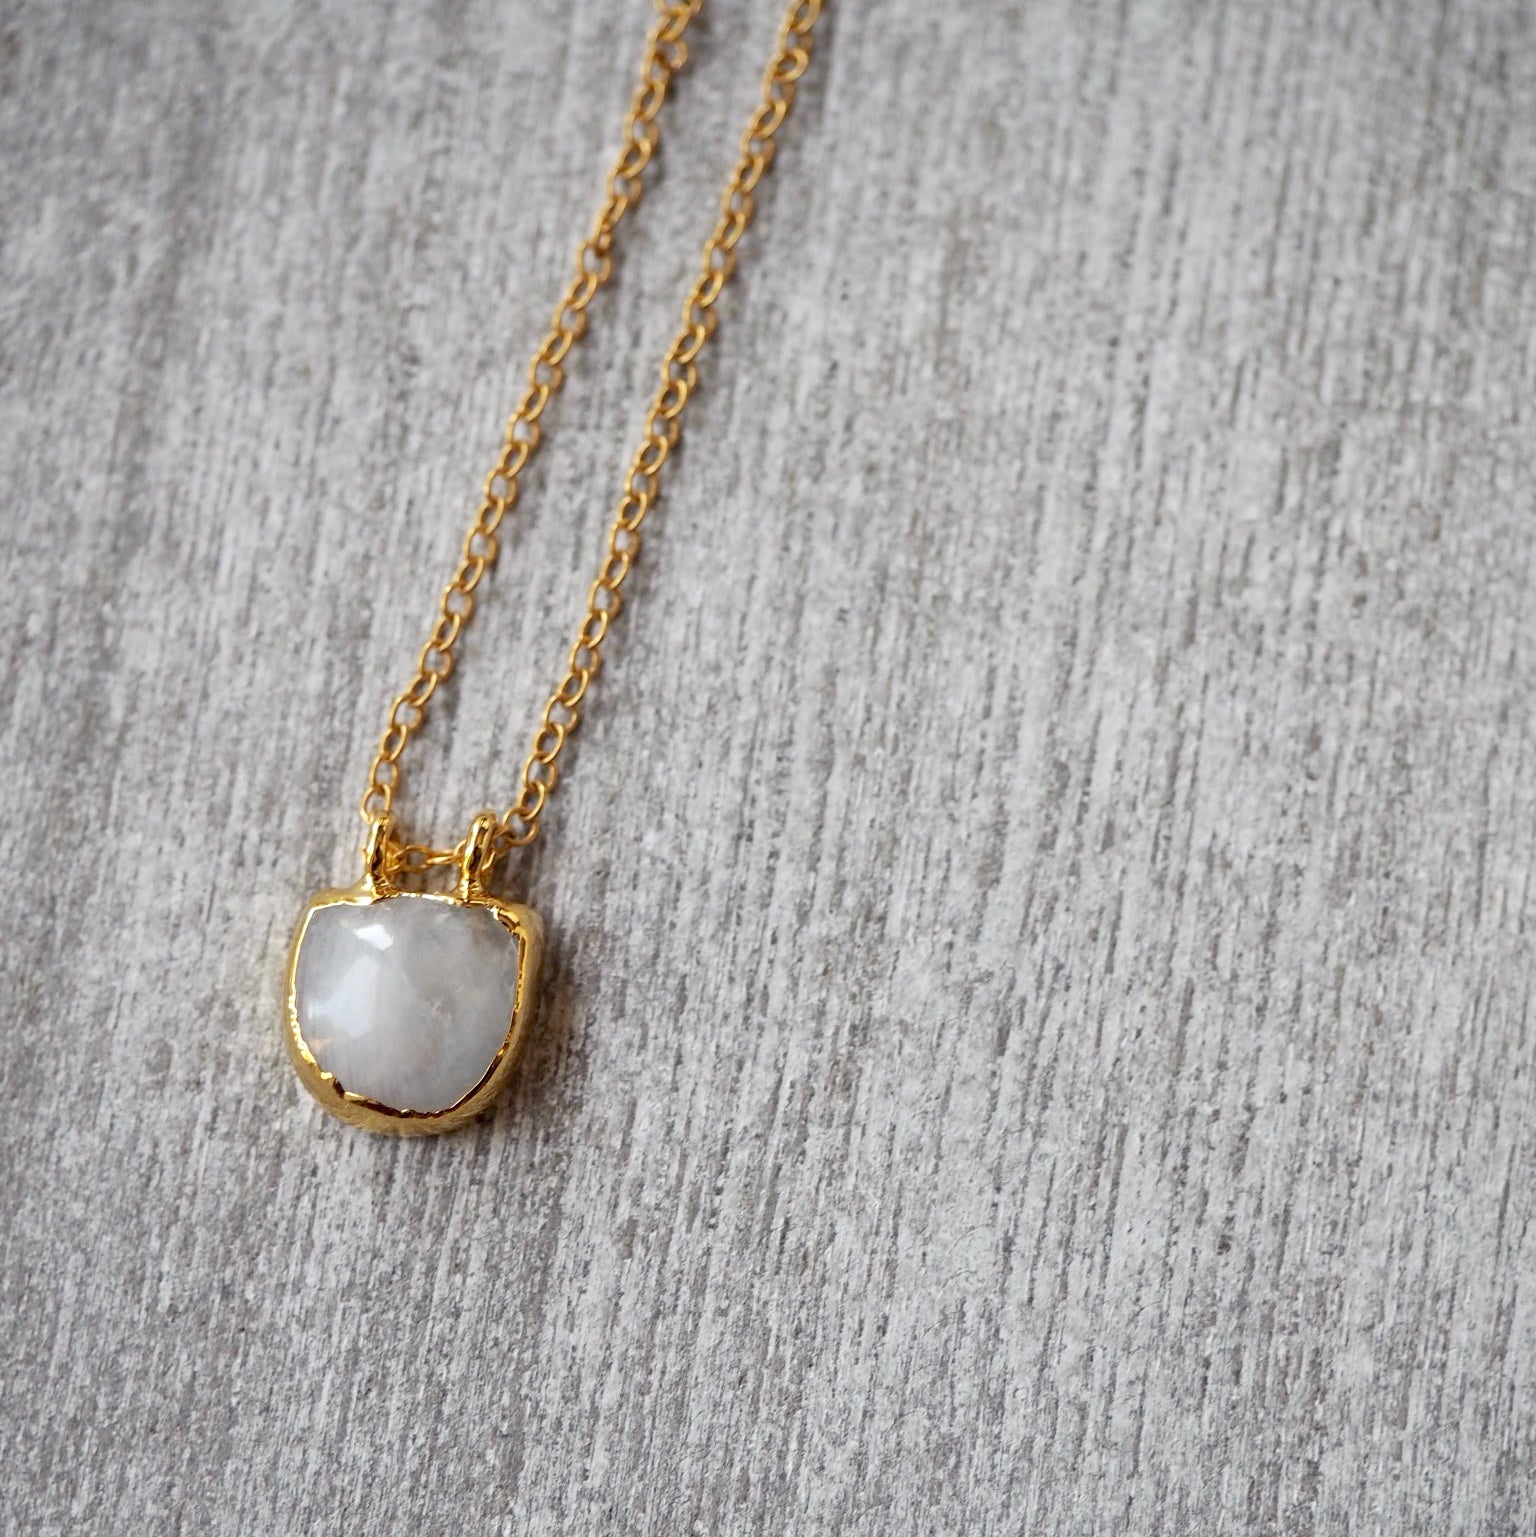 Moonstone Pendant Necklace with 14k gold filled chain